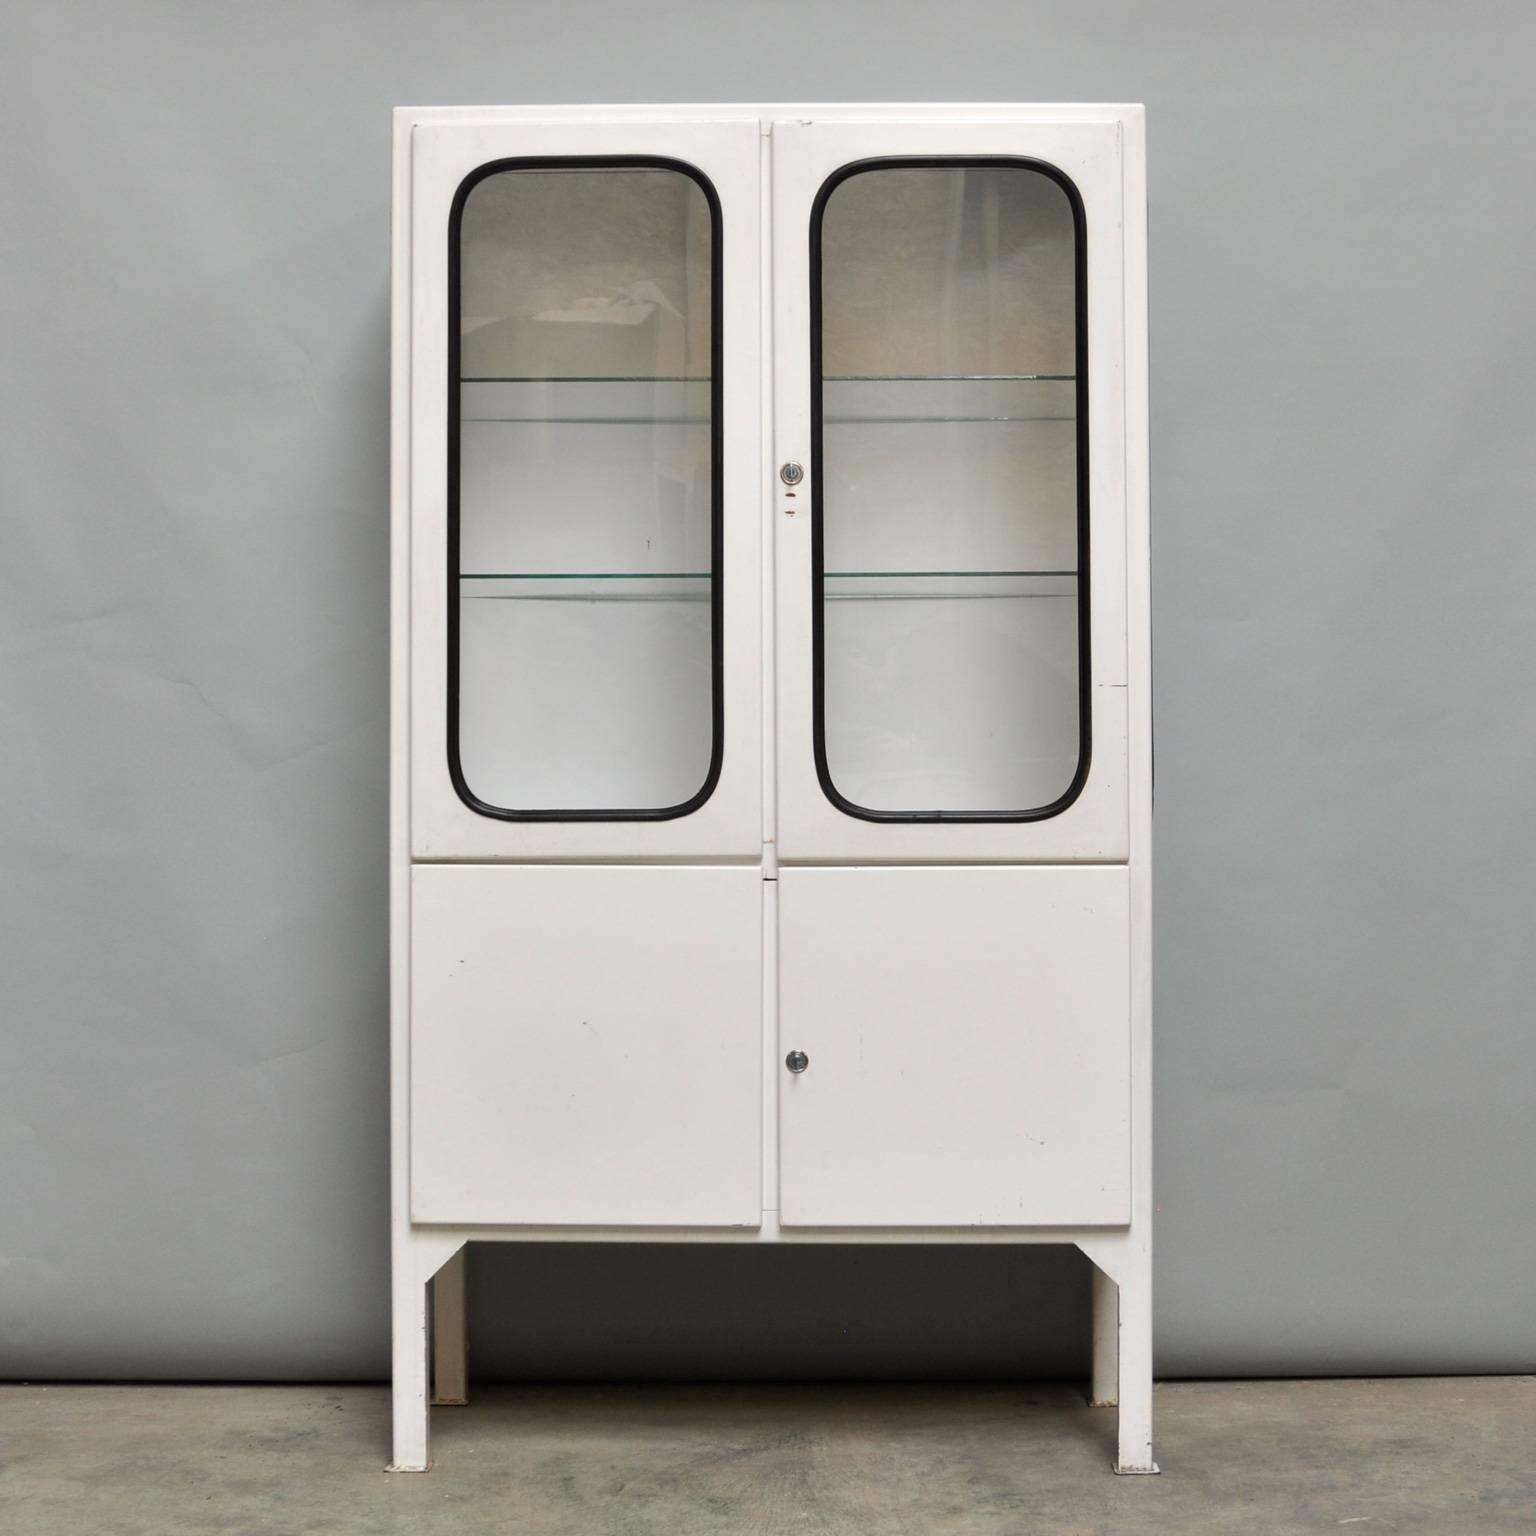 This medicine cabinet was designed in the 1970s and was produced circa 1975 in Hungary. The piece is made from iron and glass, and the glass is held by a black rubber strip. The cabinet features two adjustable glass shelves and a functioning lock.